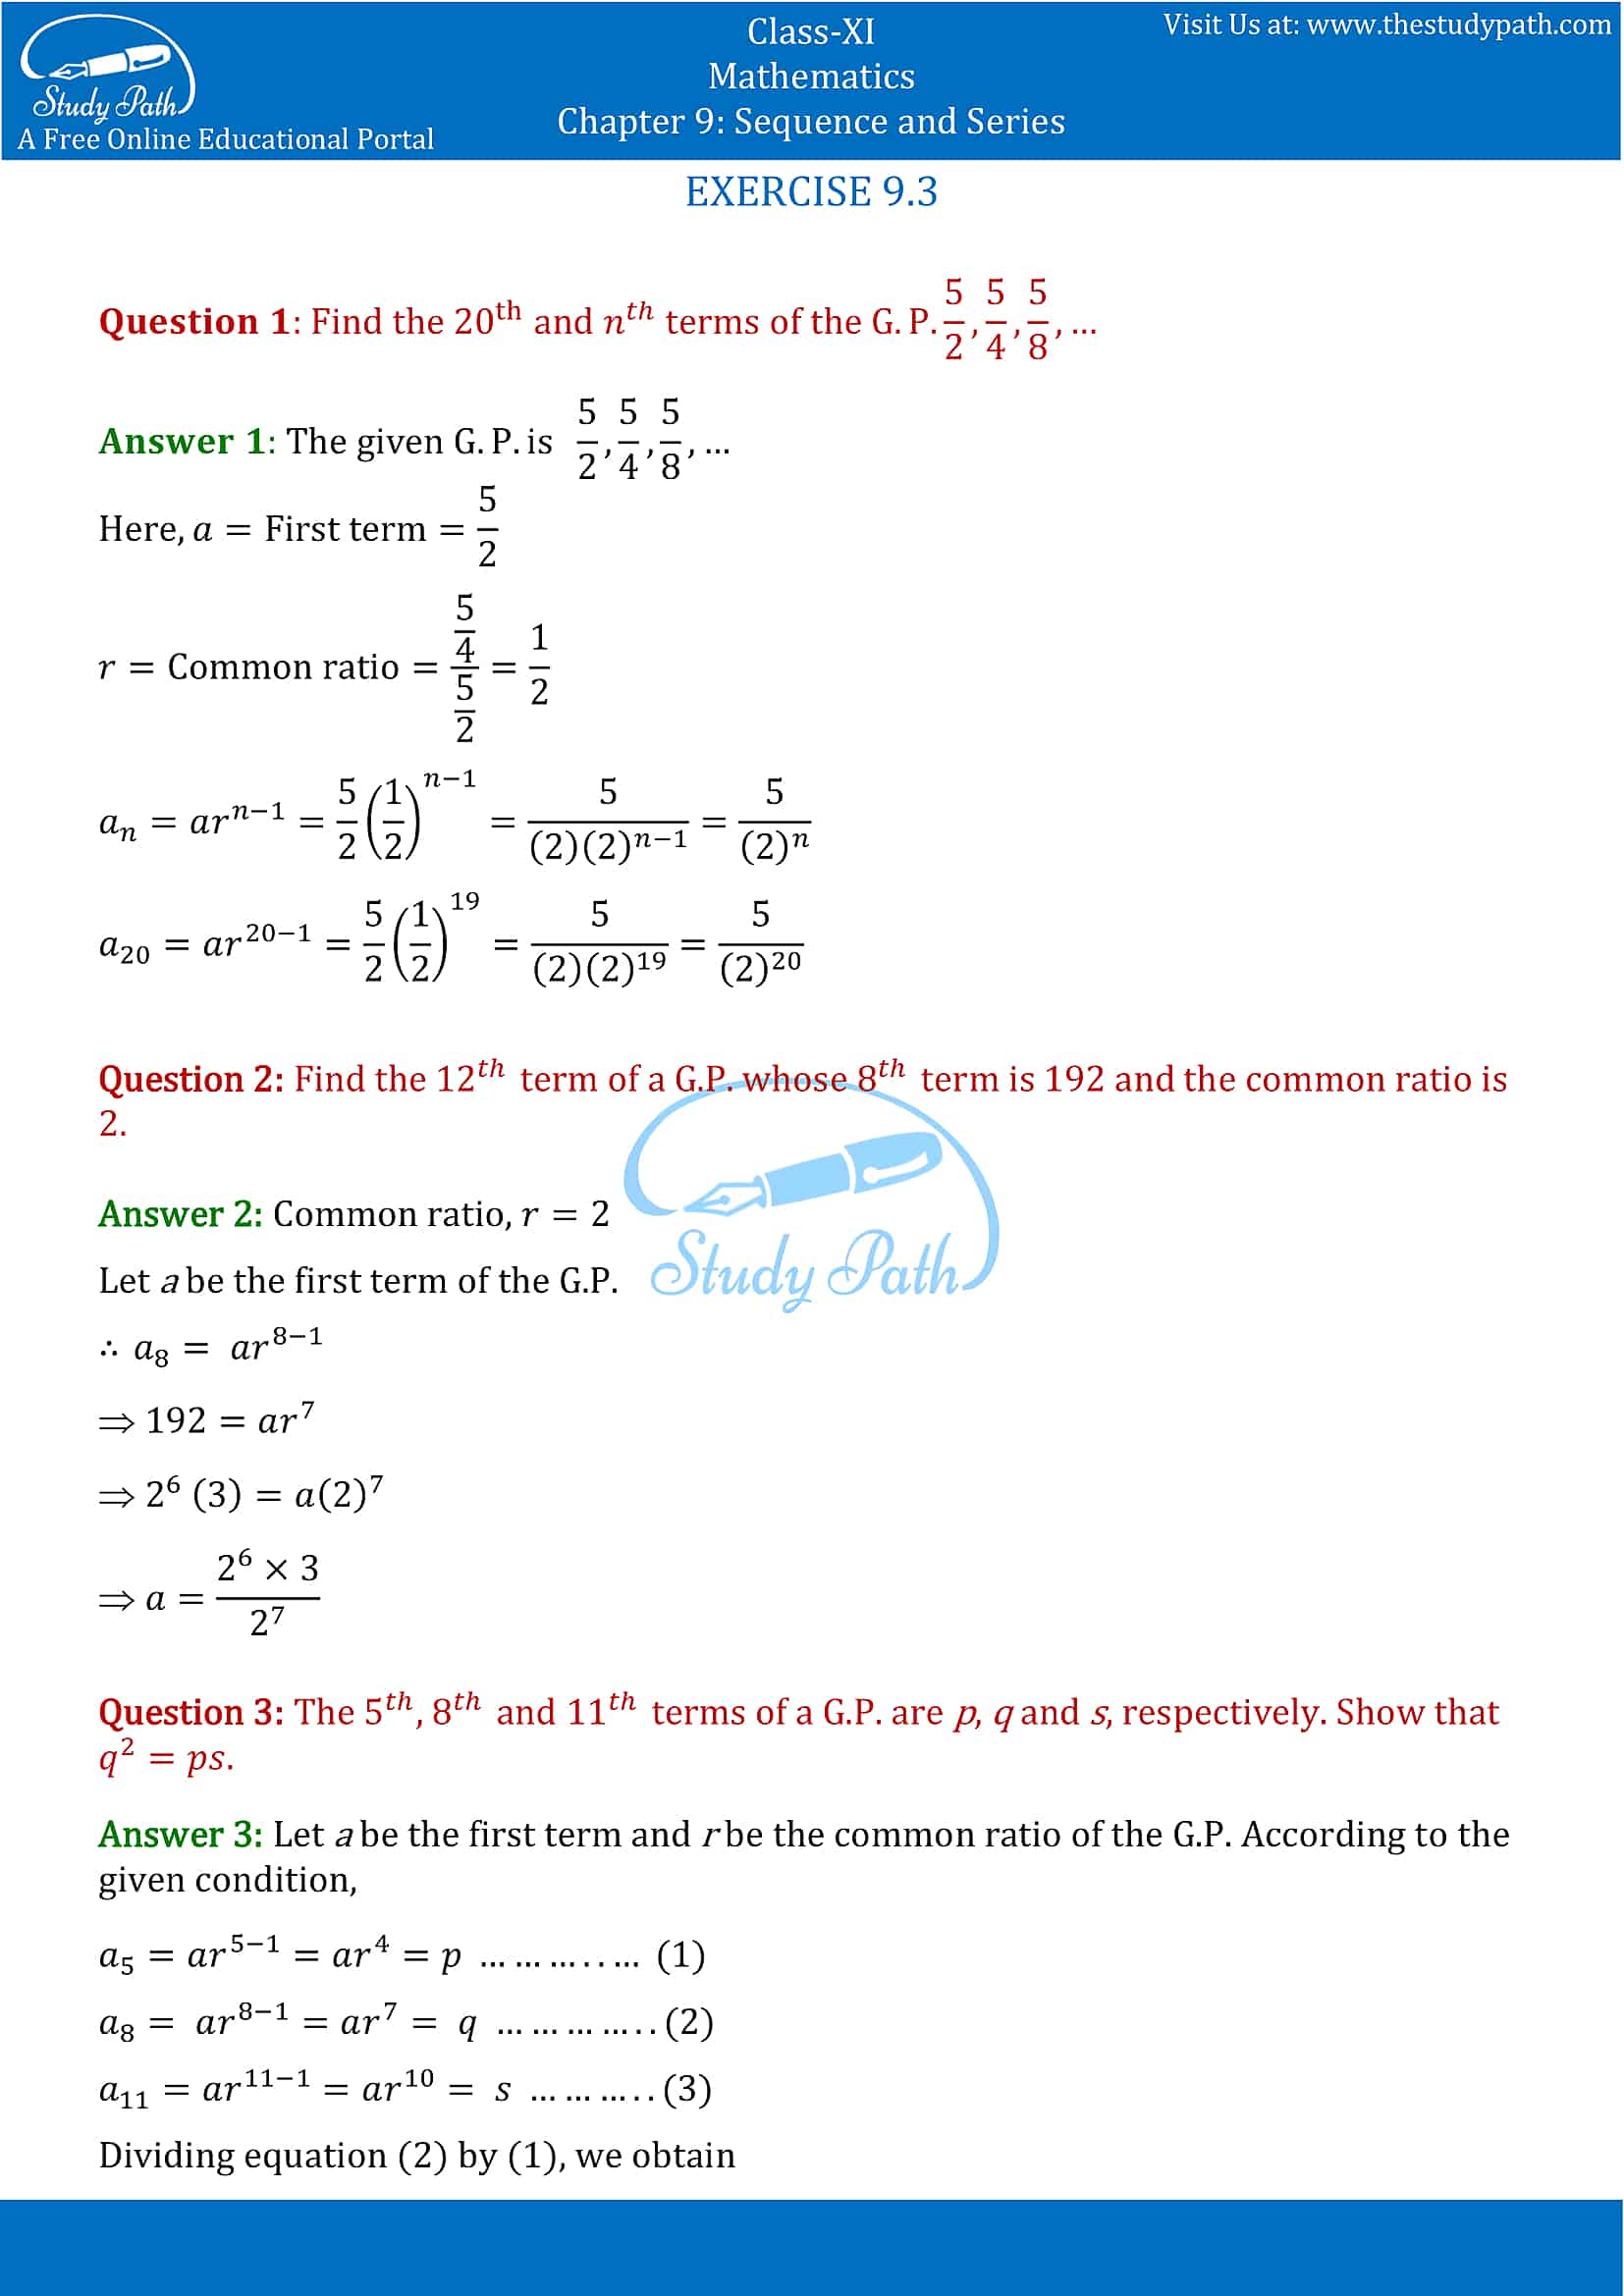 NCERT Solutions for Class 11 Maths chapter 9 Sequence and Series Exercise 9.3 Part-1